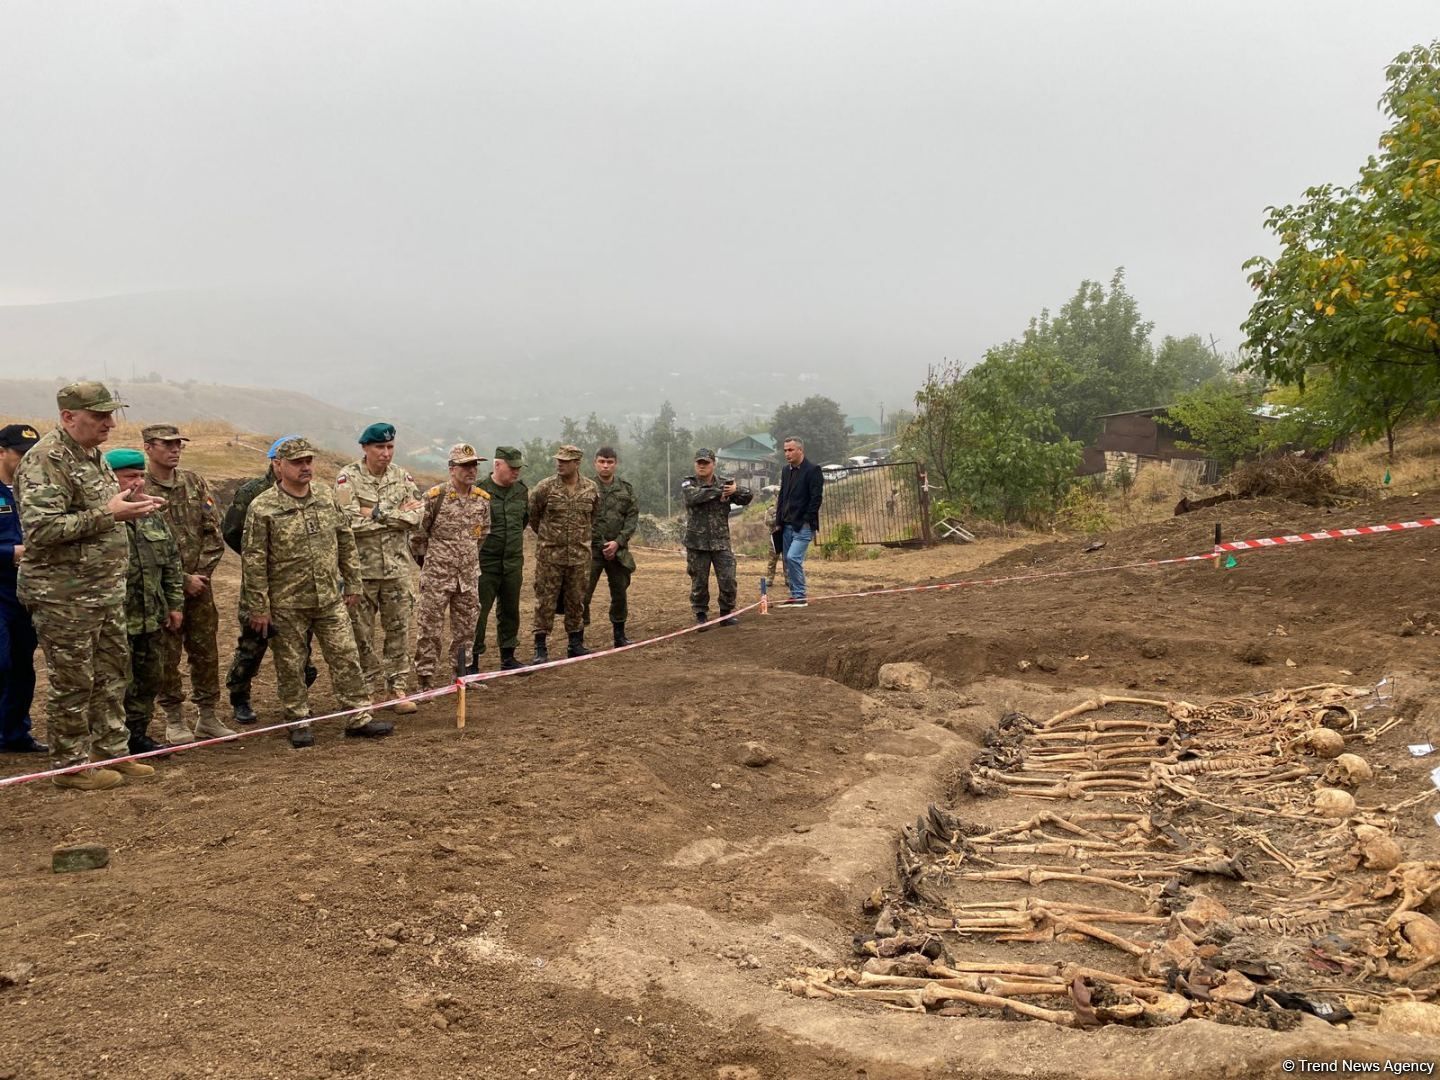 Military attachés accredited to Azerbaijan inspect recently discovered mass grave site in Karabakh [PHOTO]